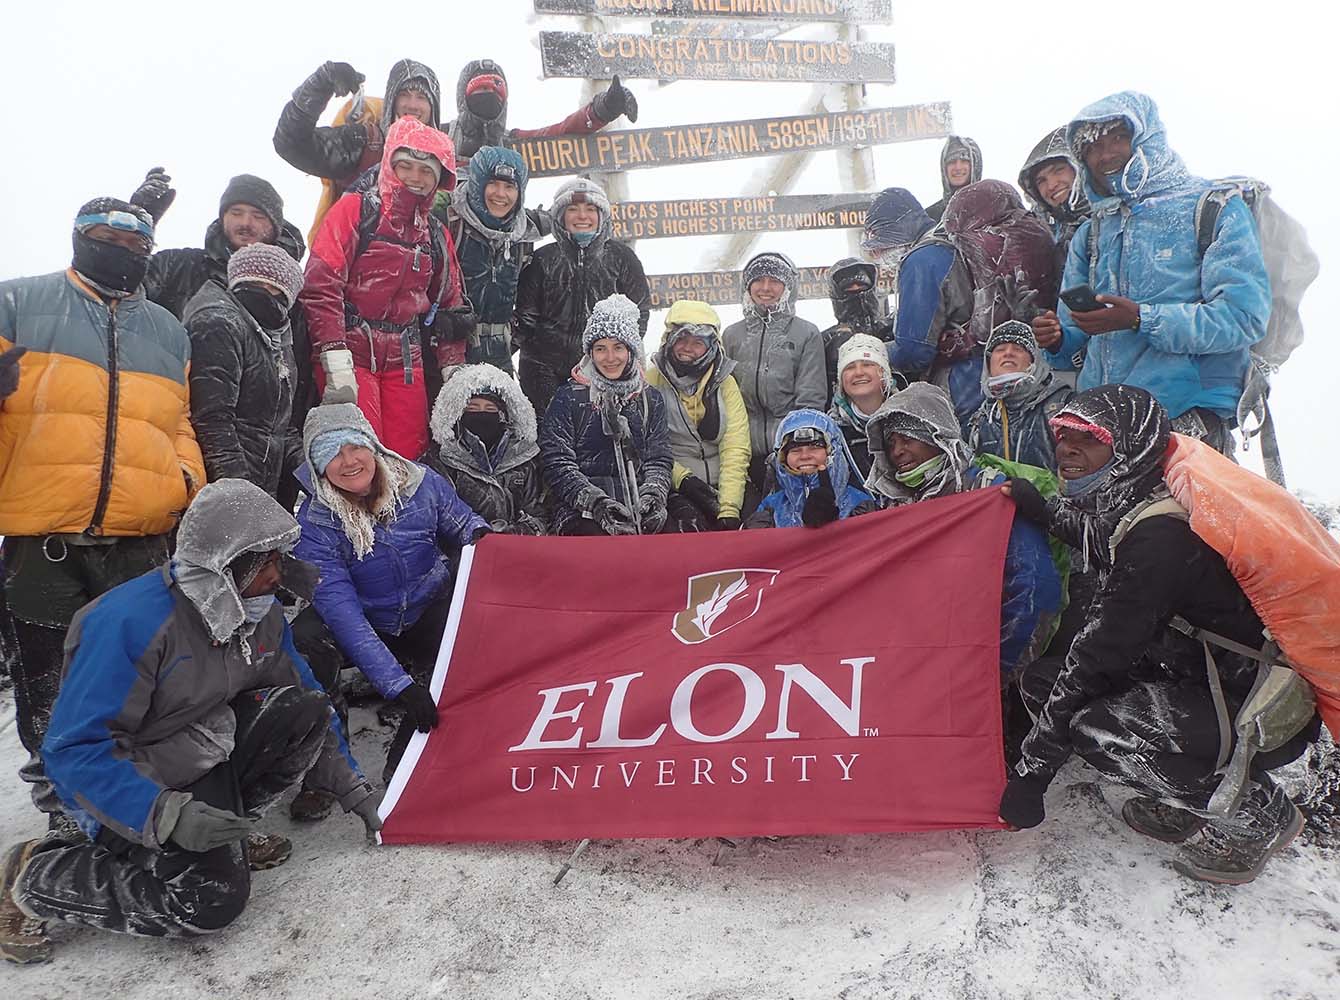 Elon students studying abroad in Tanzania stand at the top of Mount Kilimanjaro holding an Elon University banner and surrounded by snow.